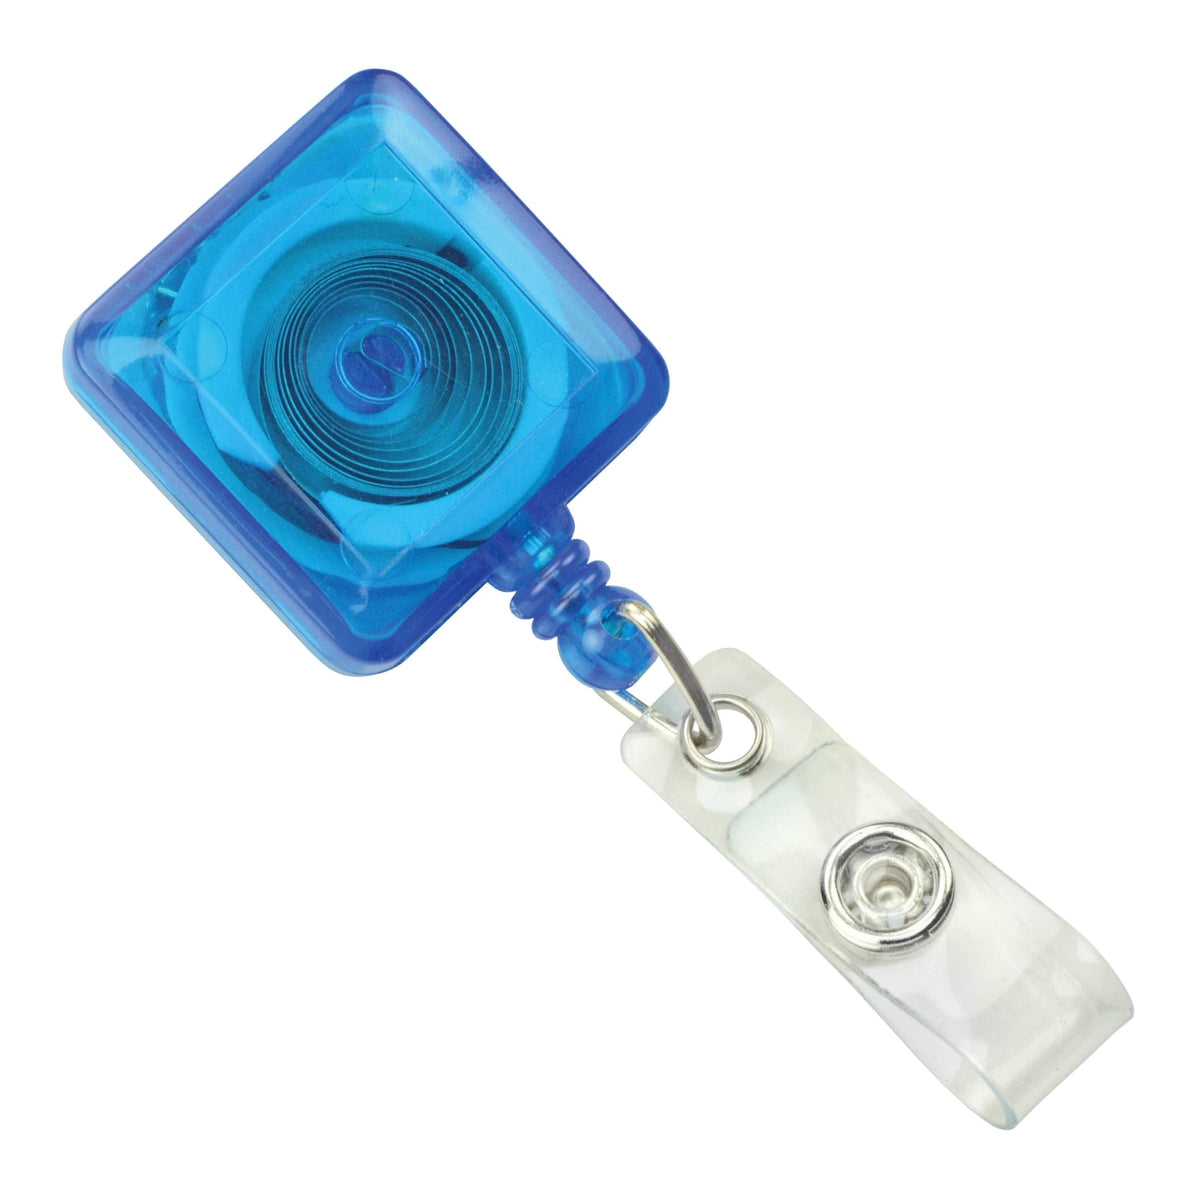 Translucent Blue Square Retractable Badge Reel With Spring Clip (P/N 2120-5712) 2120-5712